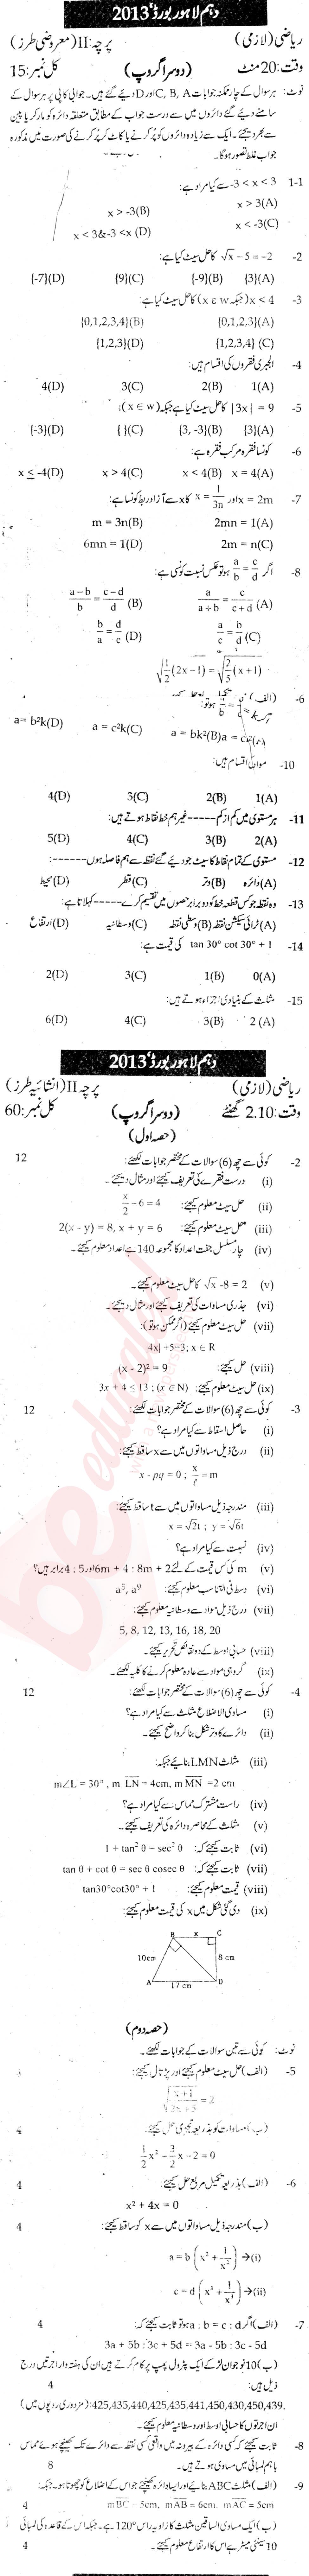 Math 10th class Past Paper Group 2 BISE Lahore 2013